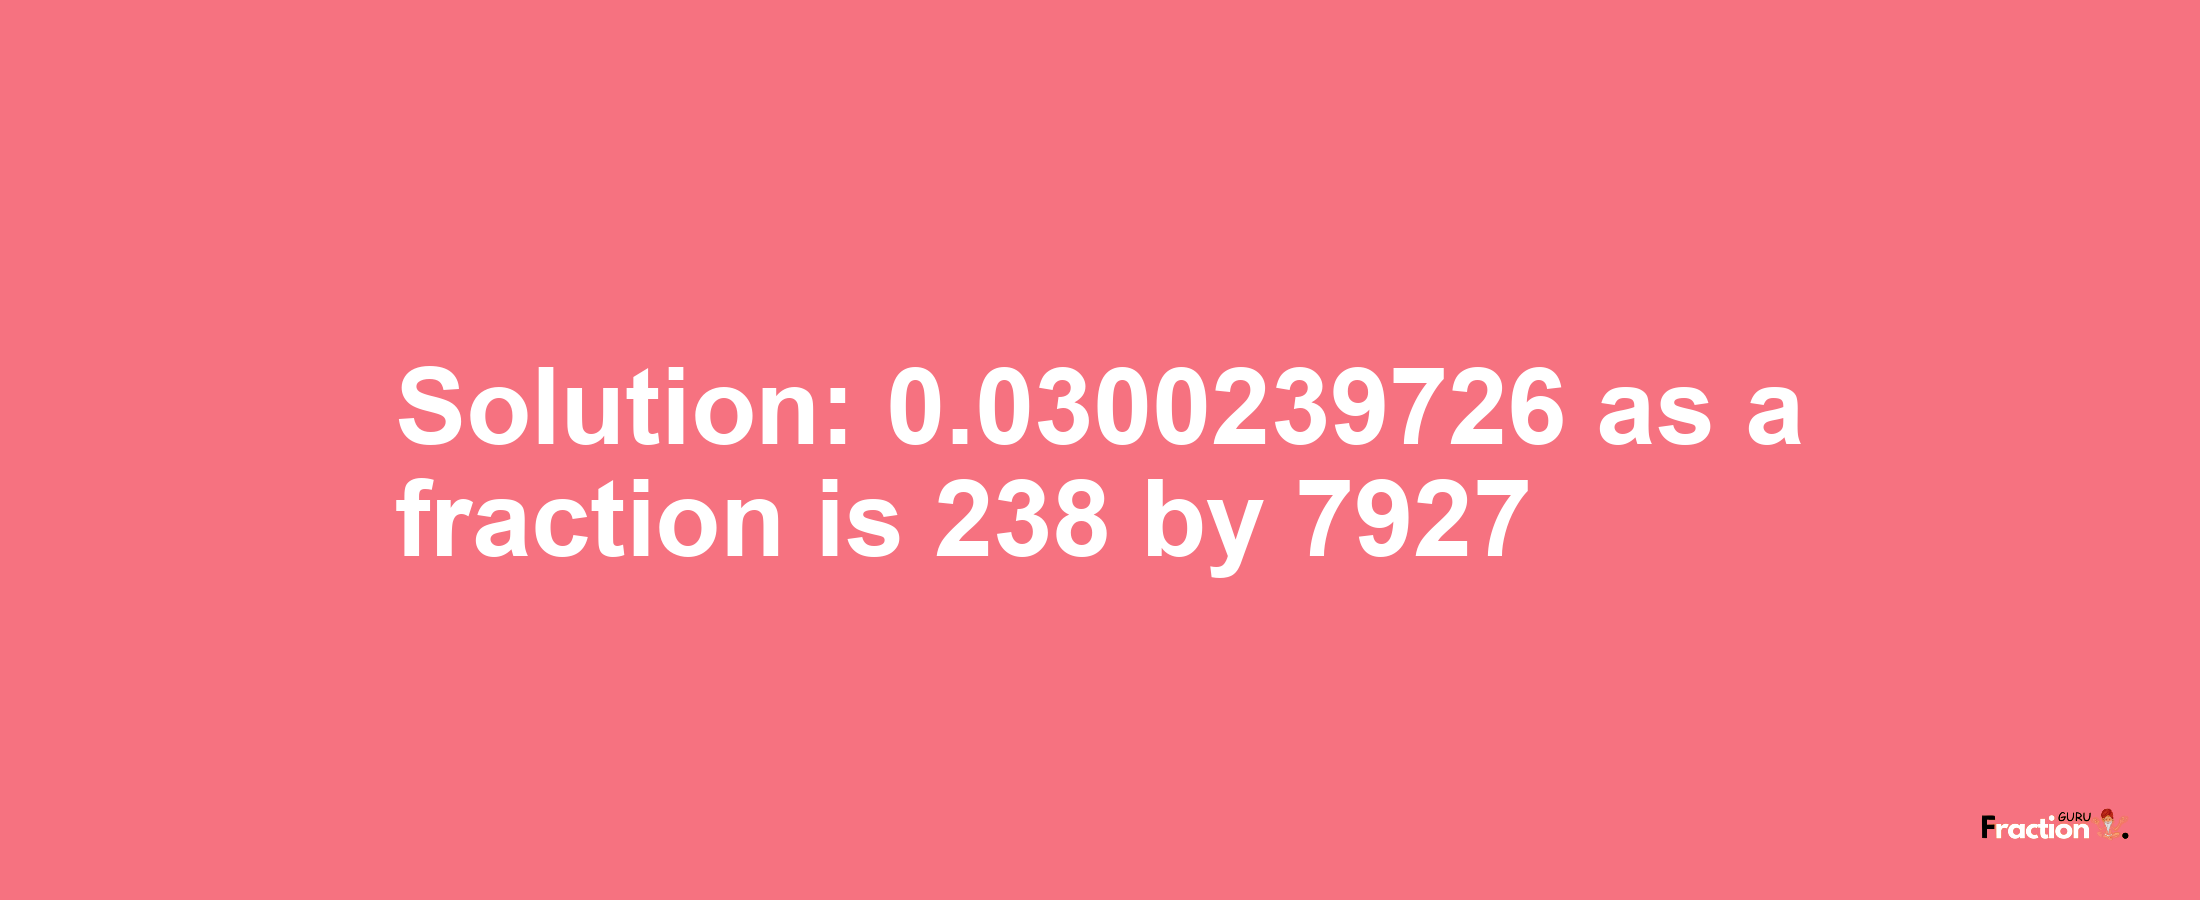 Solution:0.0300239726 as a fraction is 238/7927